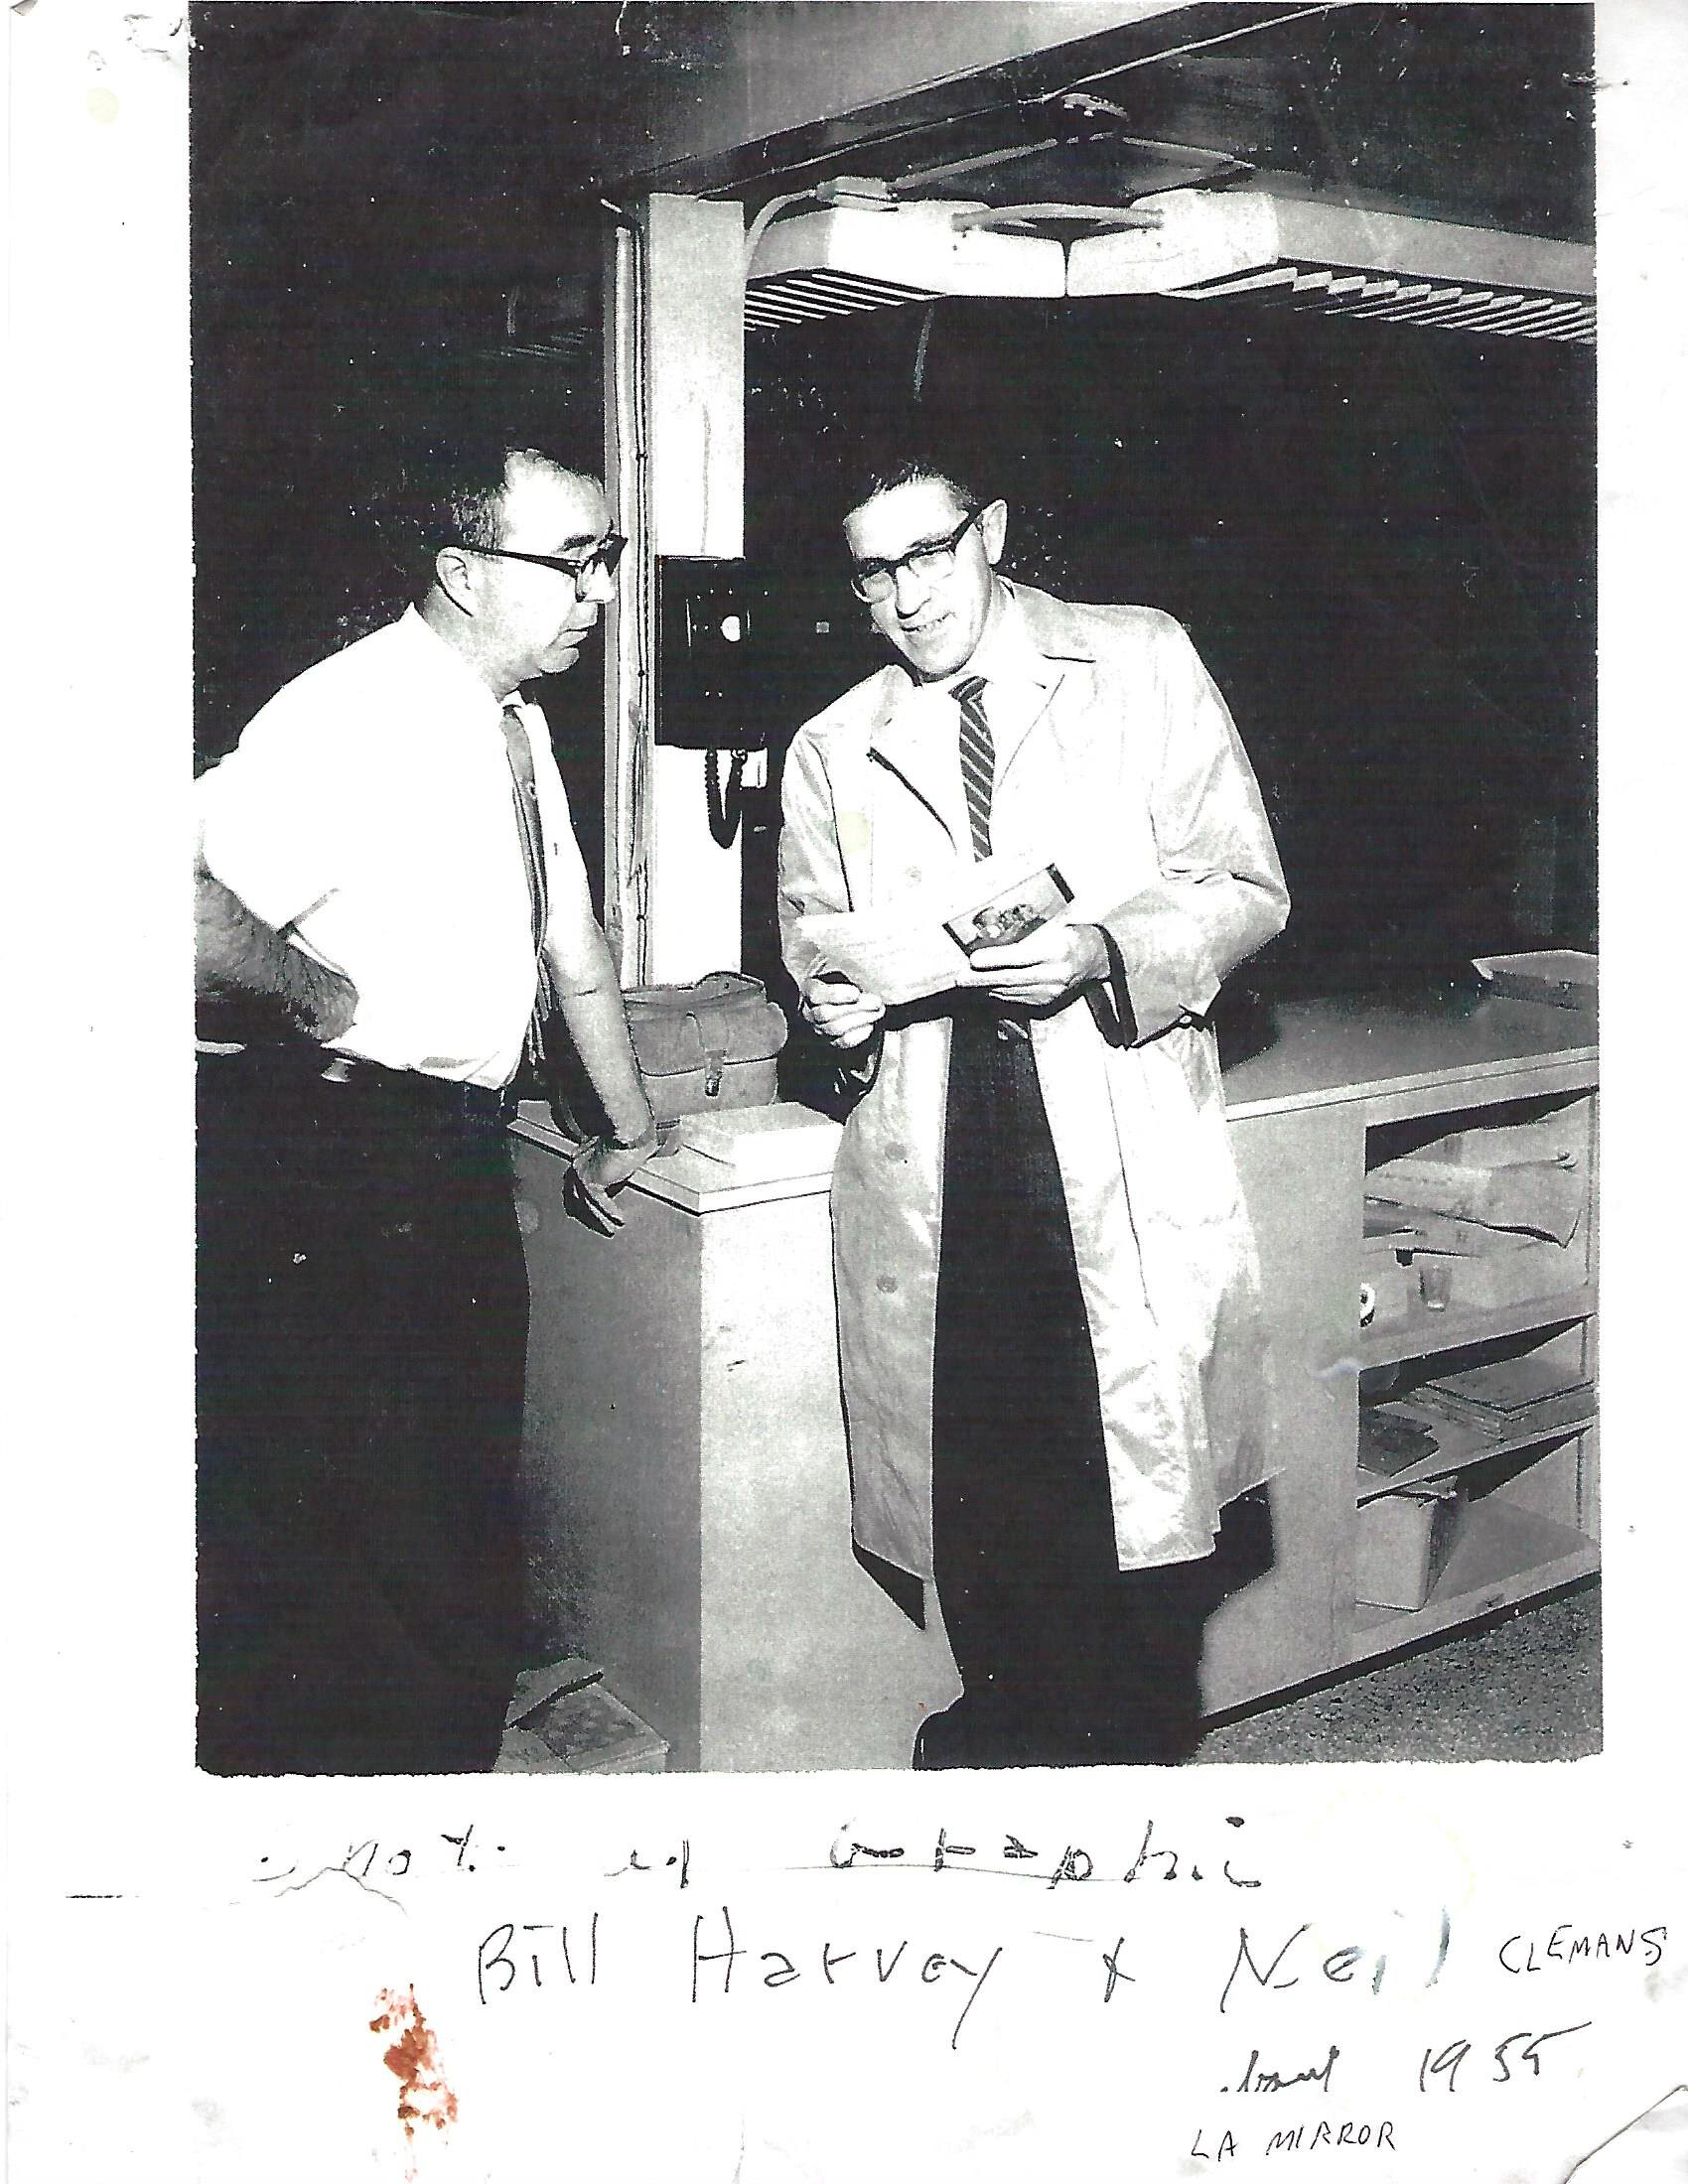  Lifetime Achievement Awardees. Left, Bill Harvey and Neil Clemans. Photo from 1955, possibly at the LA Times. 